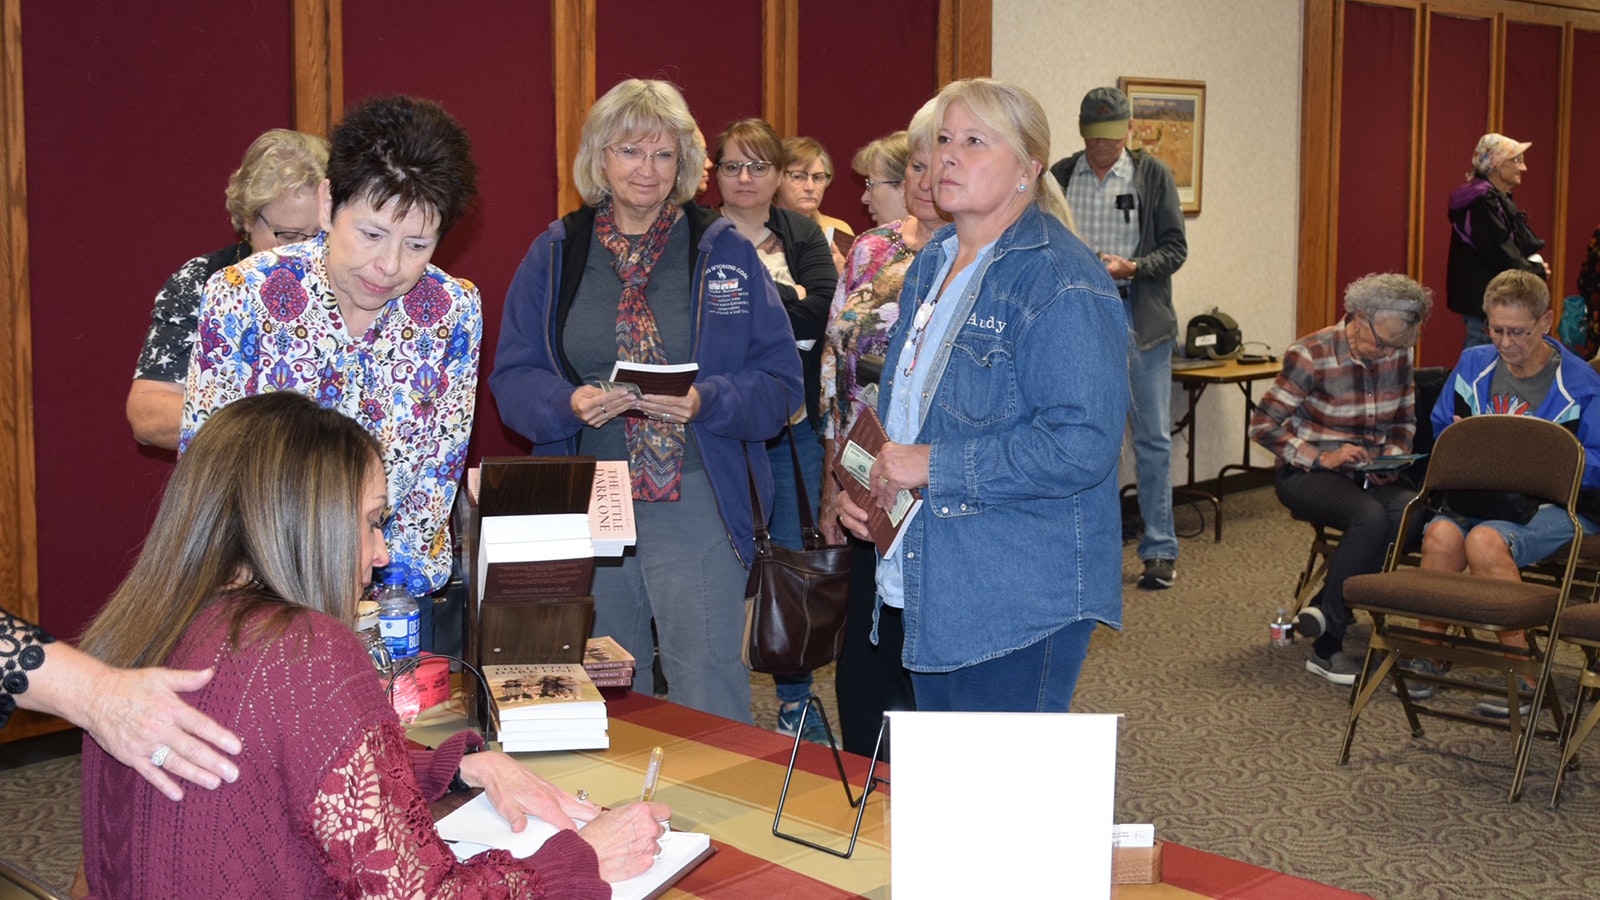 Shirley Munoz Newson signs copies of her book, "The Little Dark One: A True Story of Switched at Birth," at the Campbell County Public Library in Gillette, Wyoming.